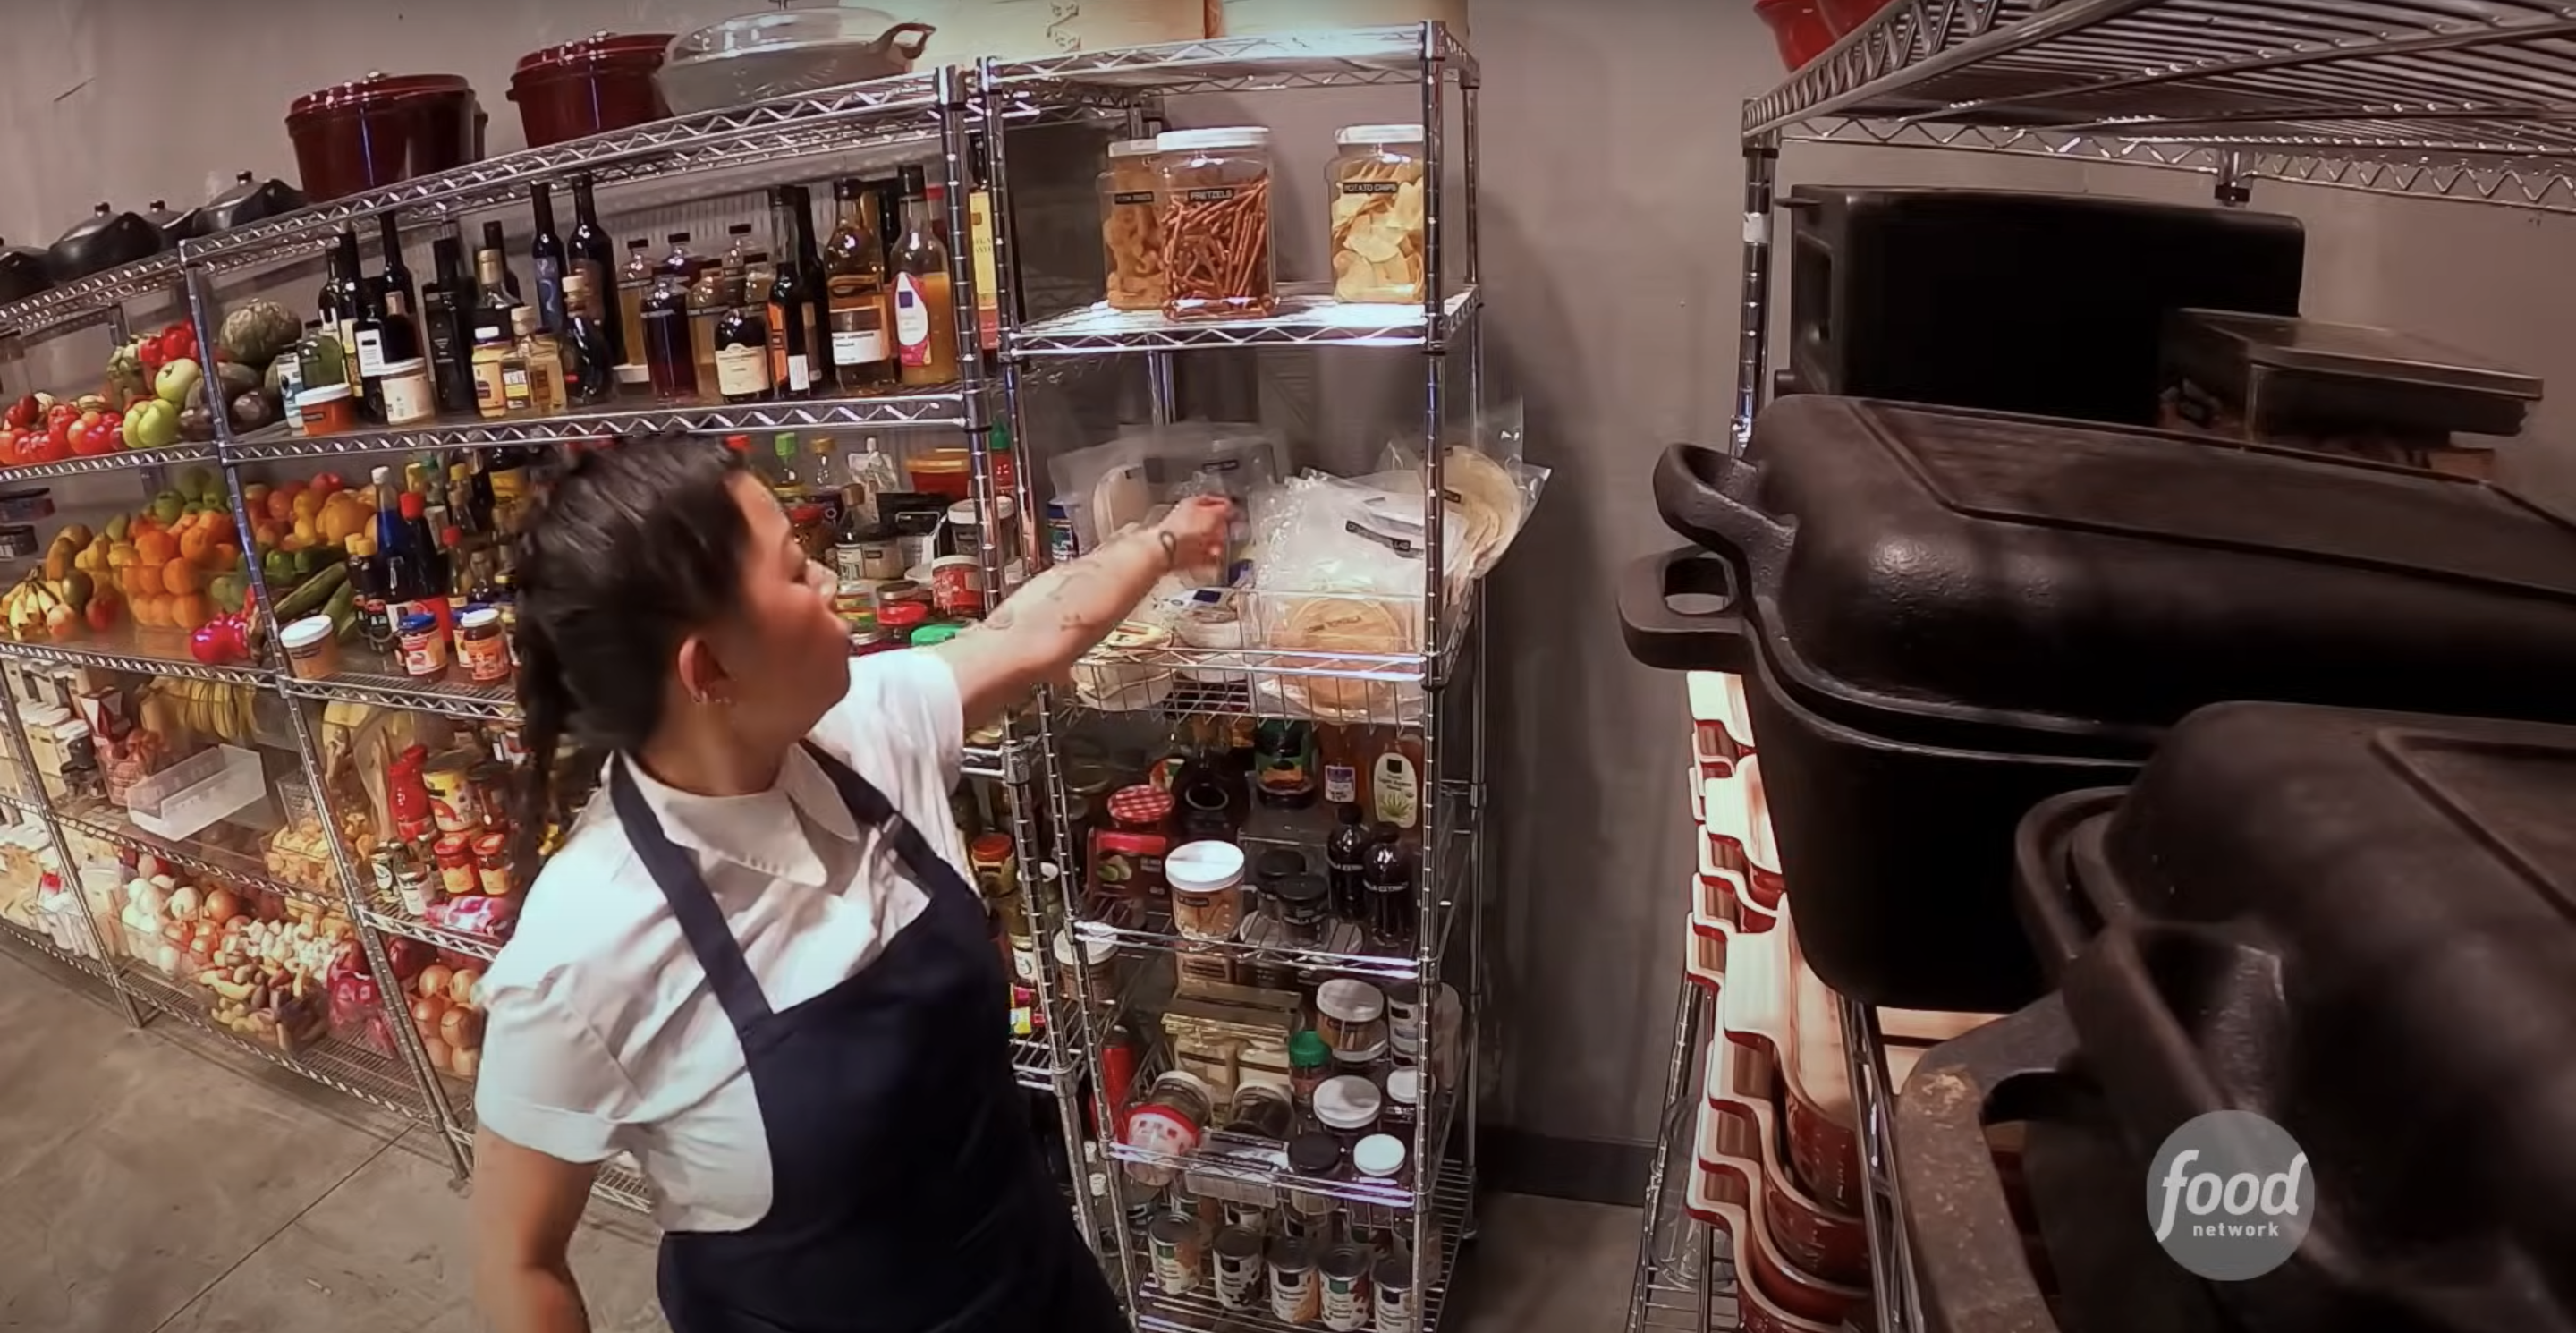 Chef in an apron reaches for ingredients on a pantry shelf in a professional kitchen